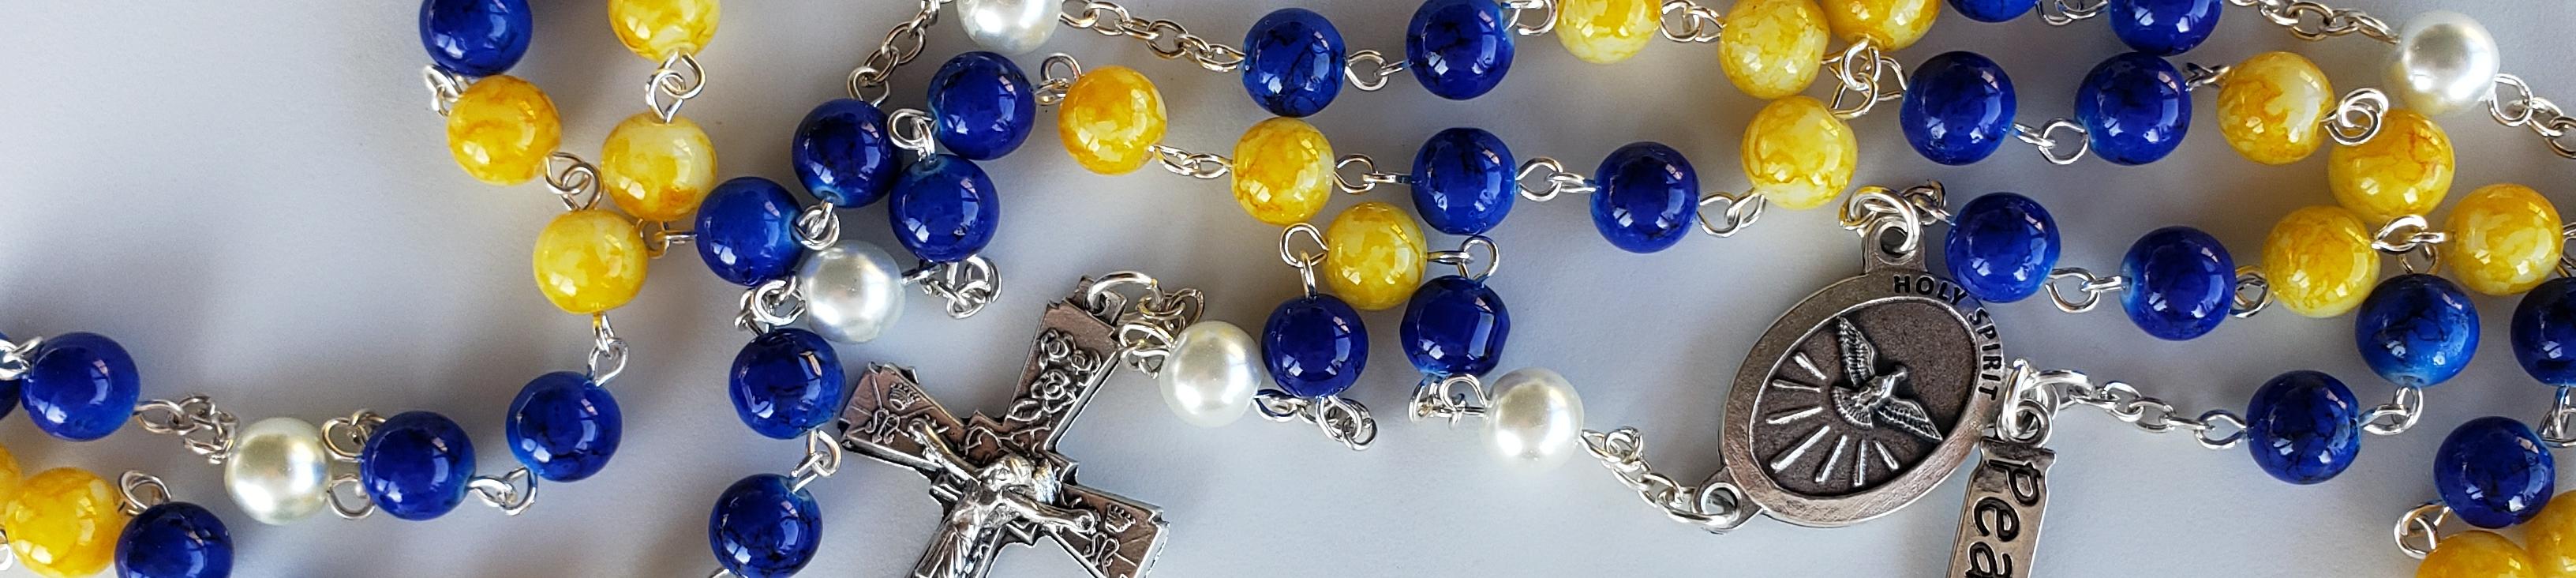 more info about rosary #52